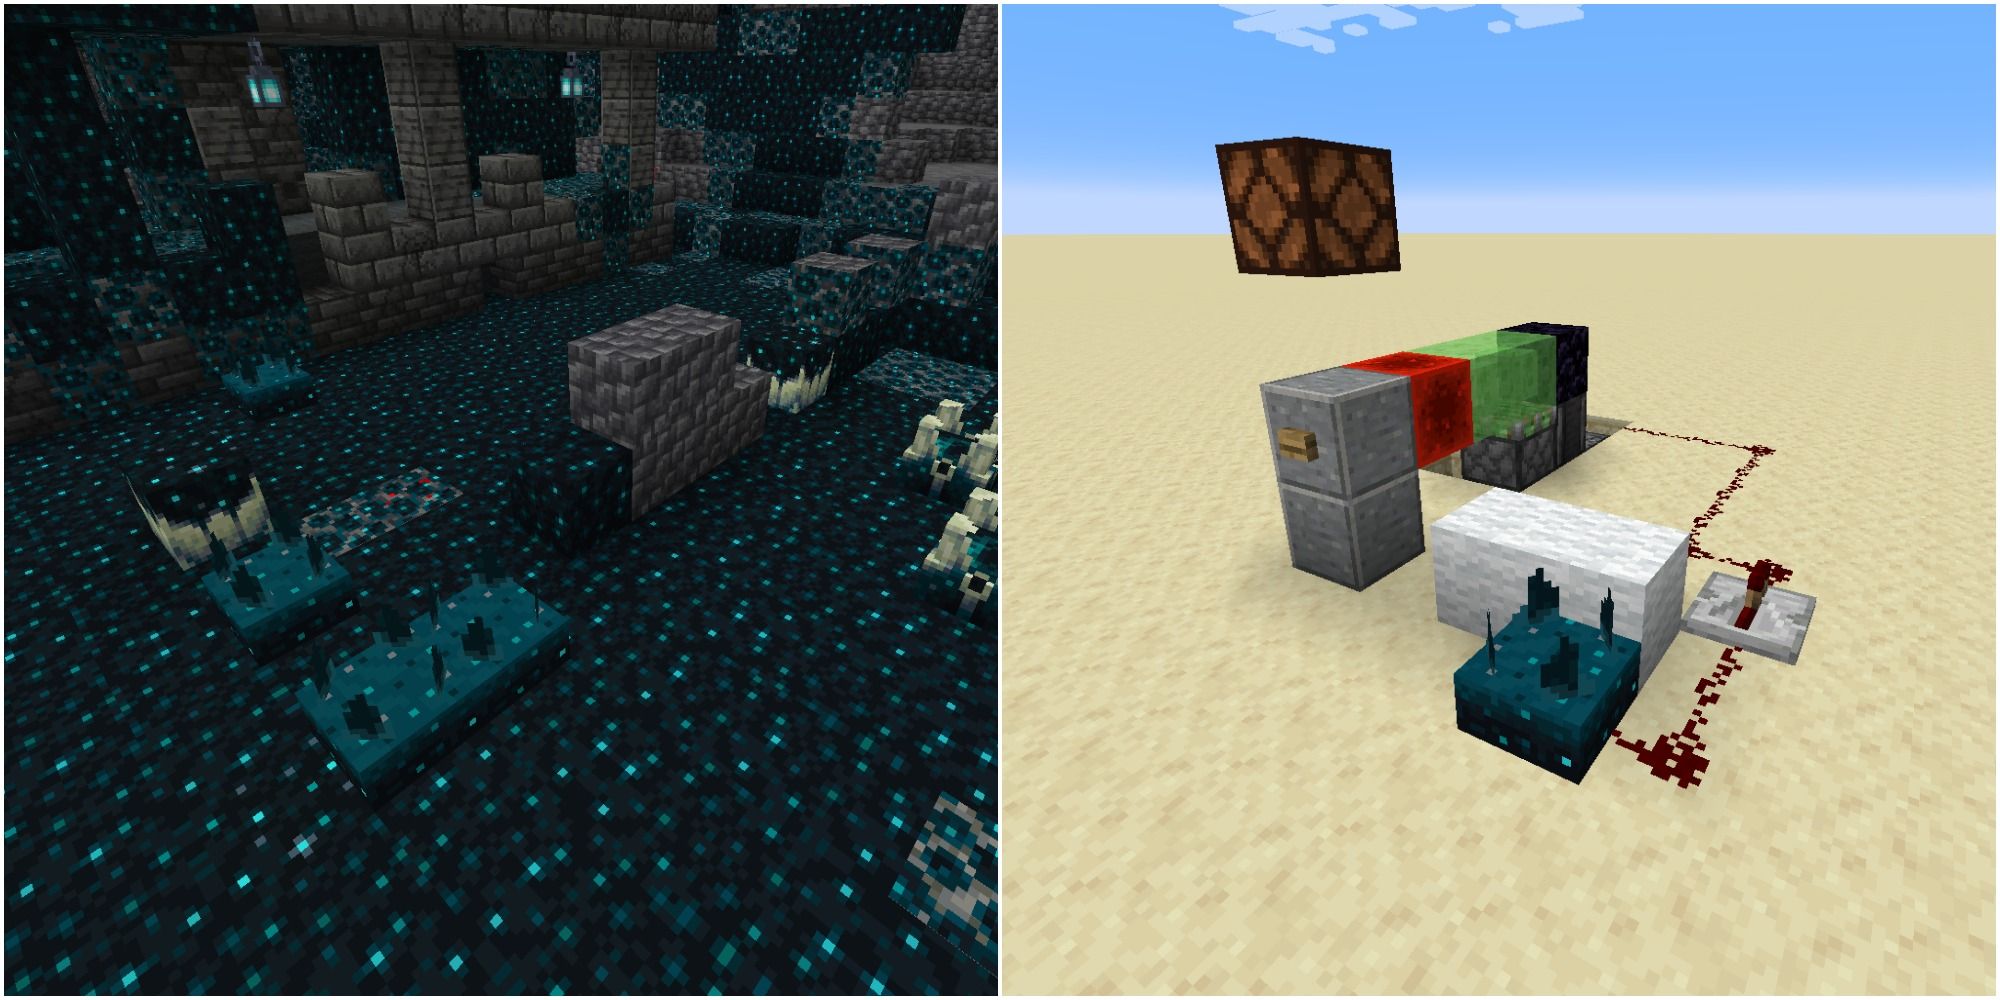 Minecraft Guide to Honey Blocks: Ideas for redstone contraptions